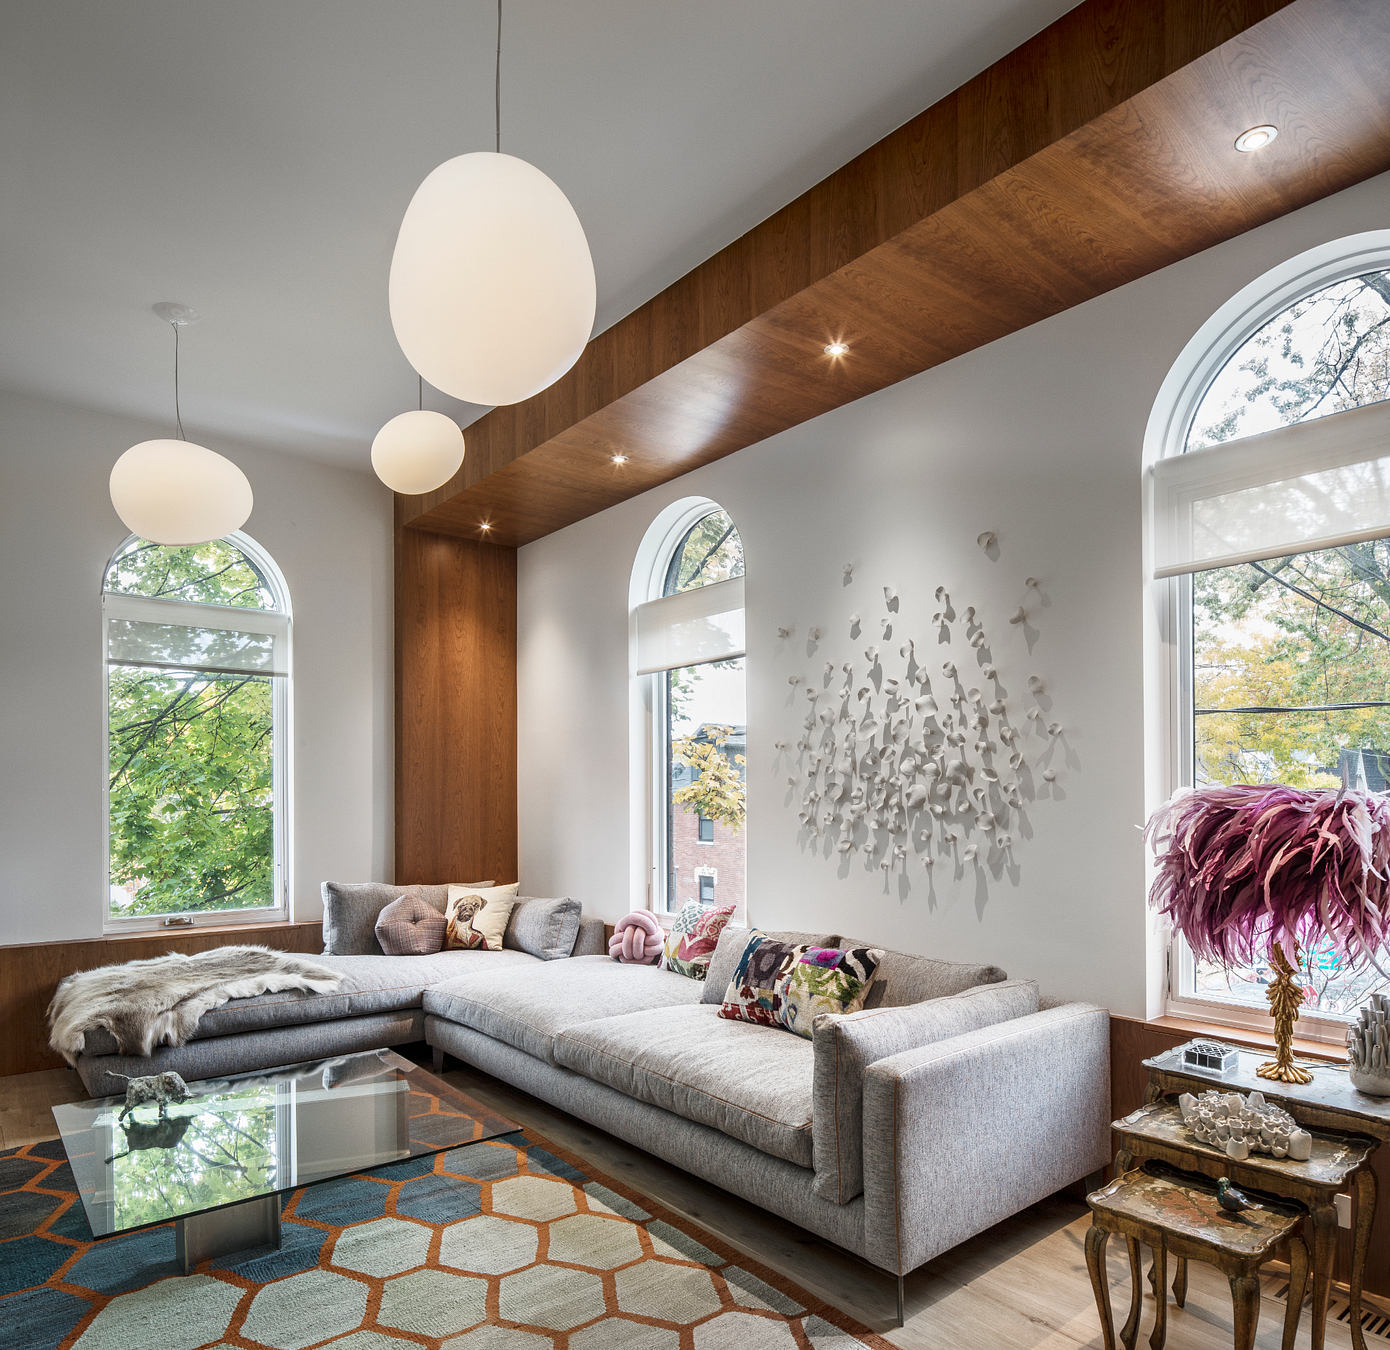 First Avenue Residence: Transforming a Century-Old Dairy into a Modern Home